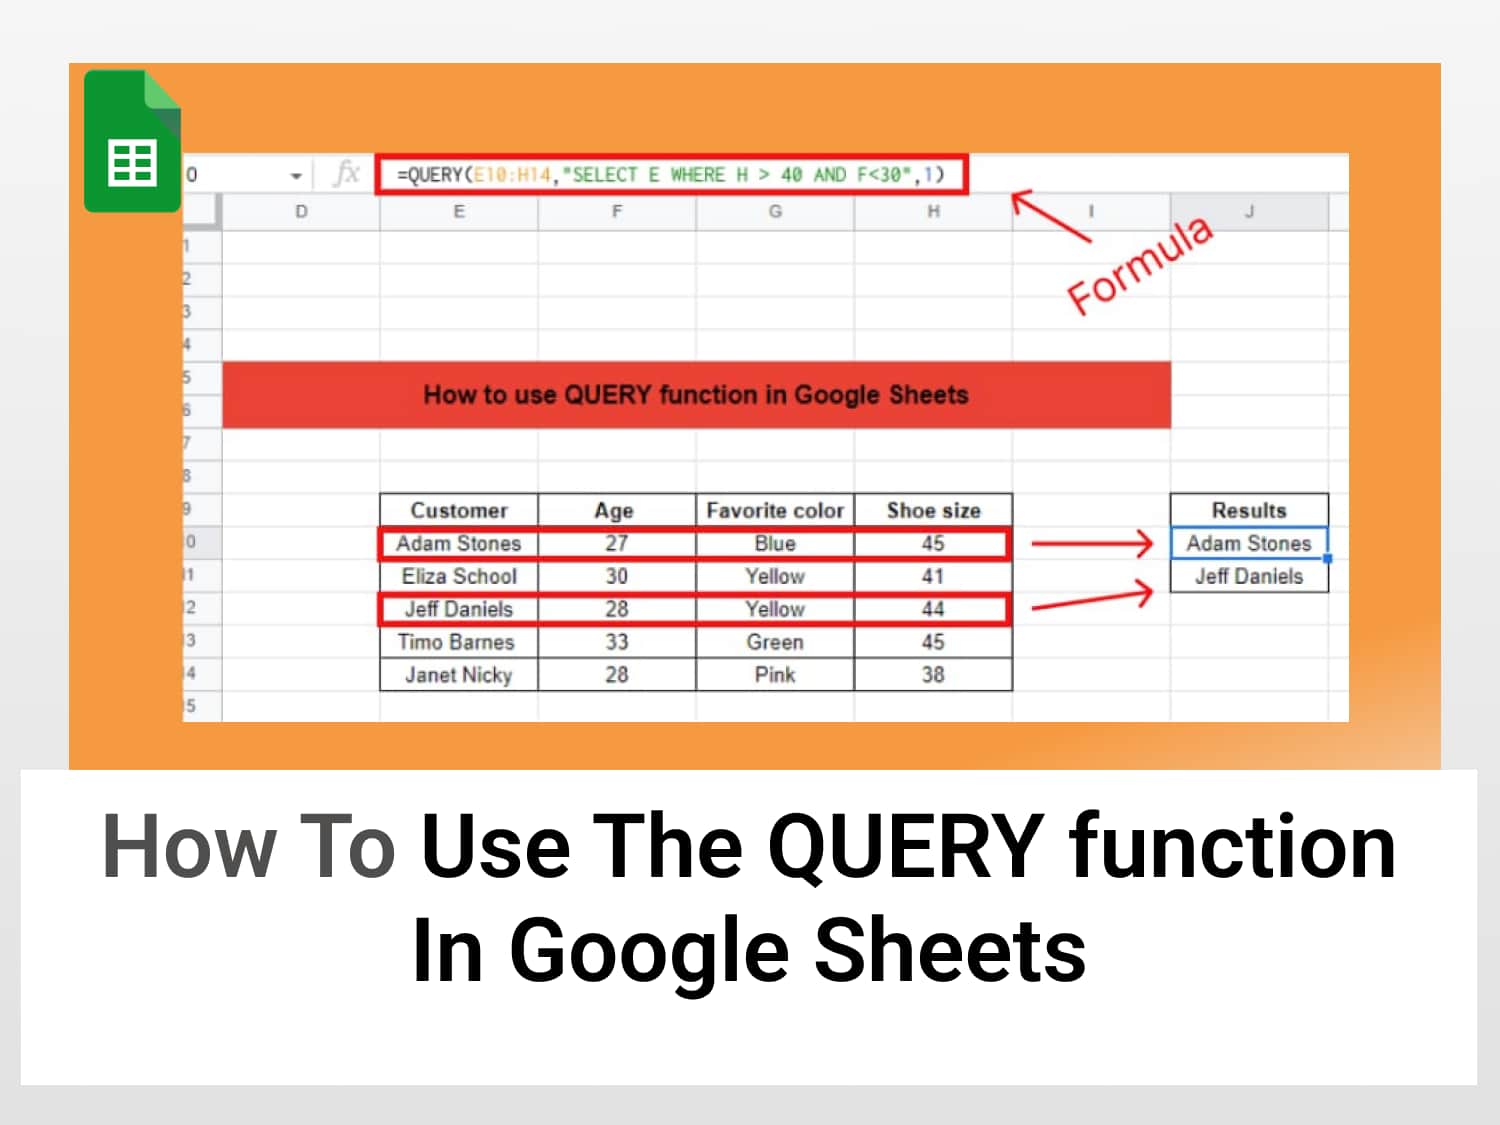 How to use the QURY function in Google Sheets